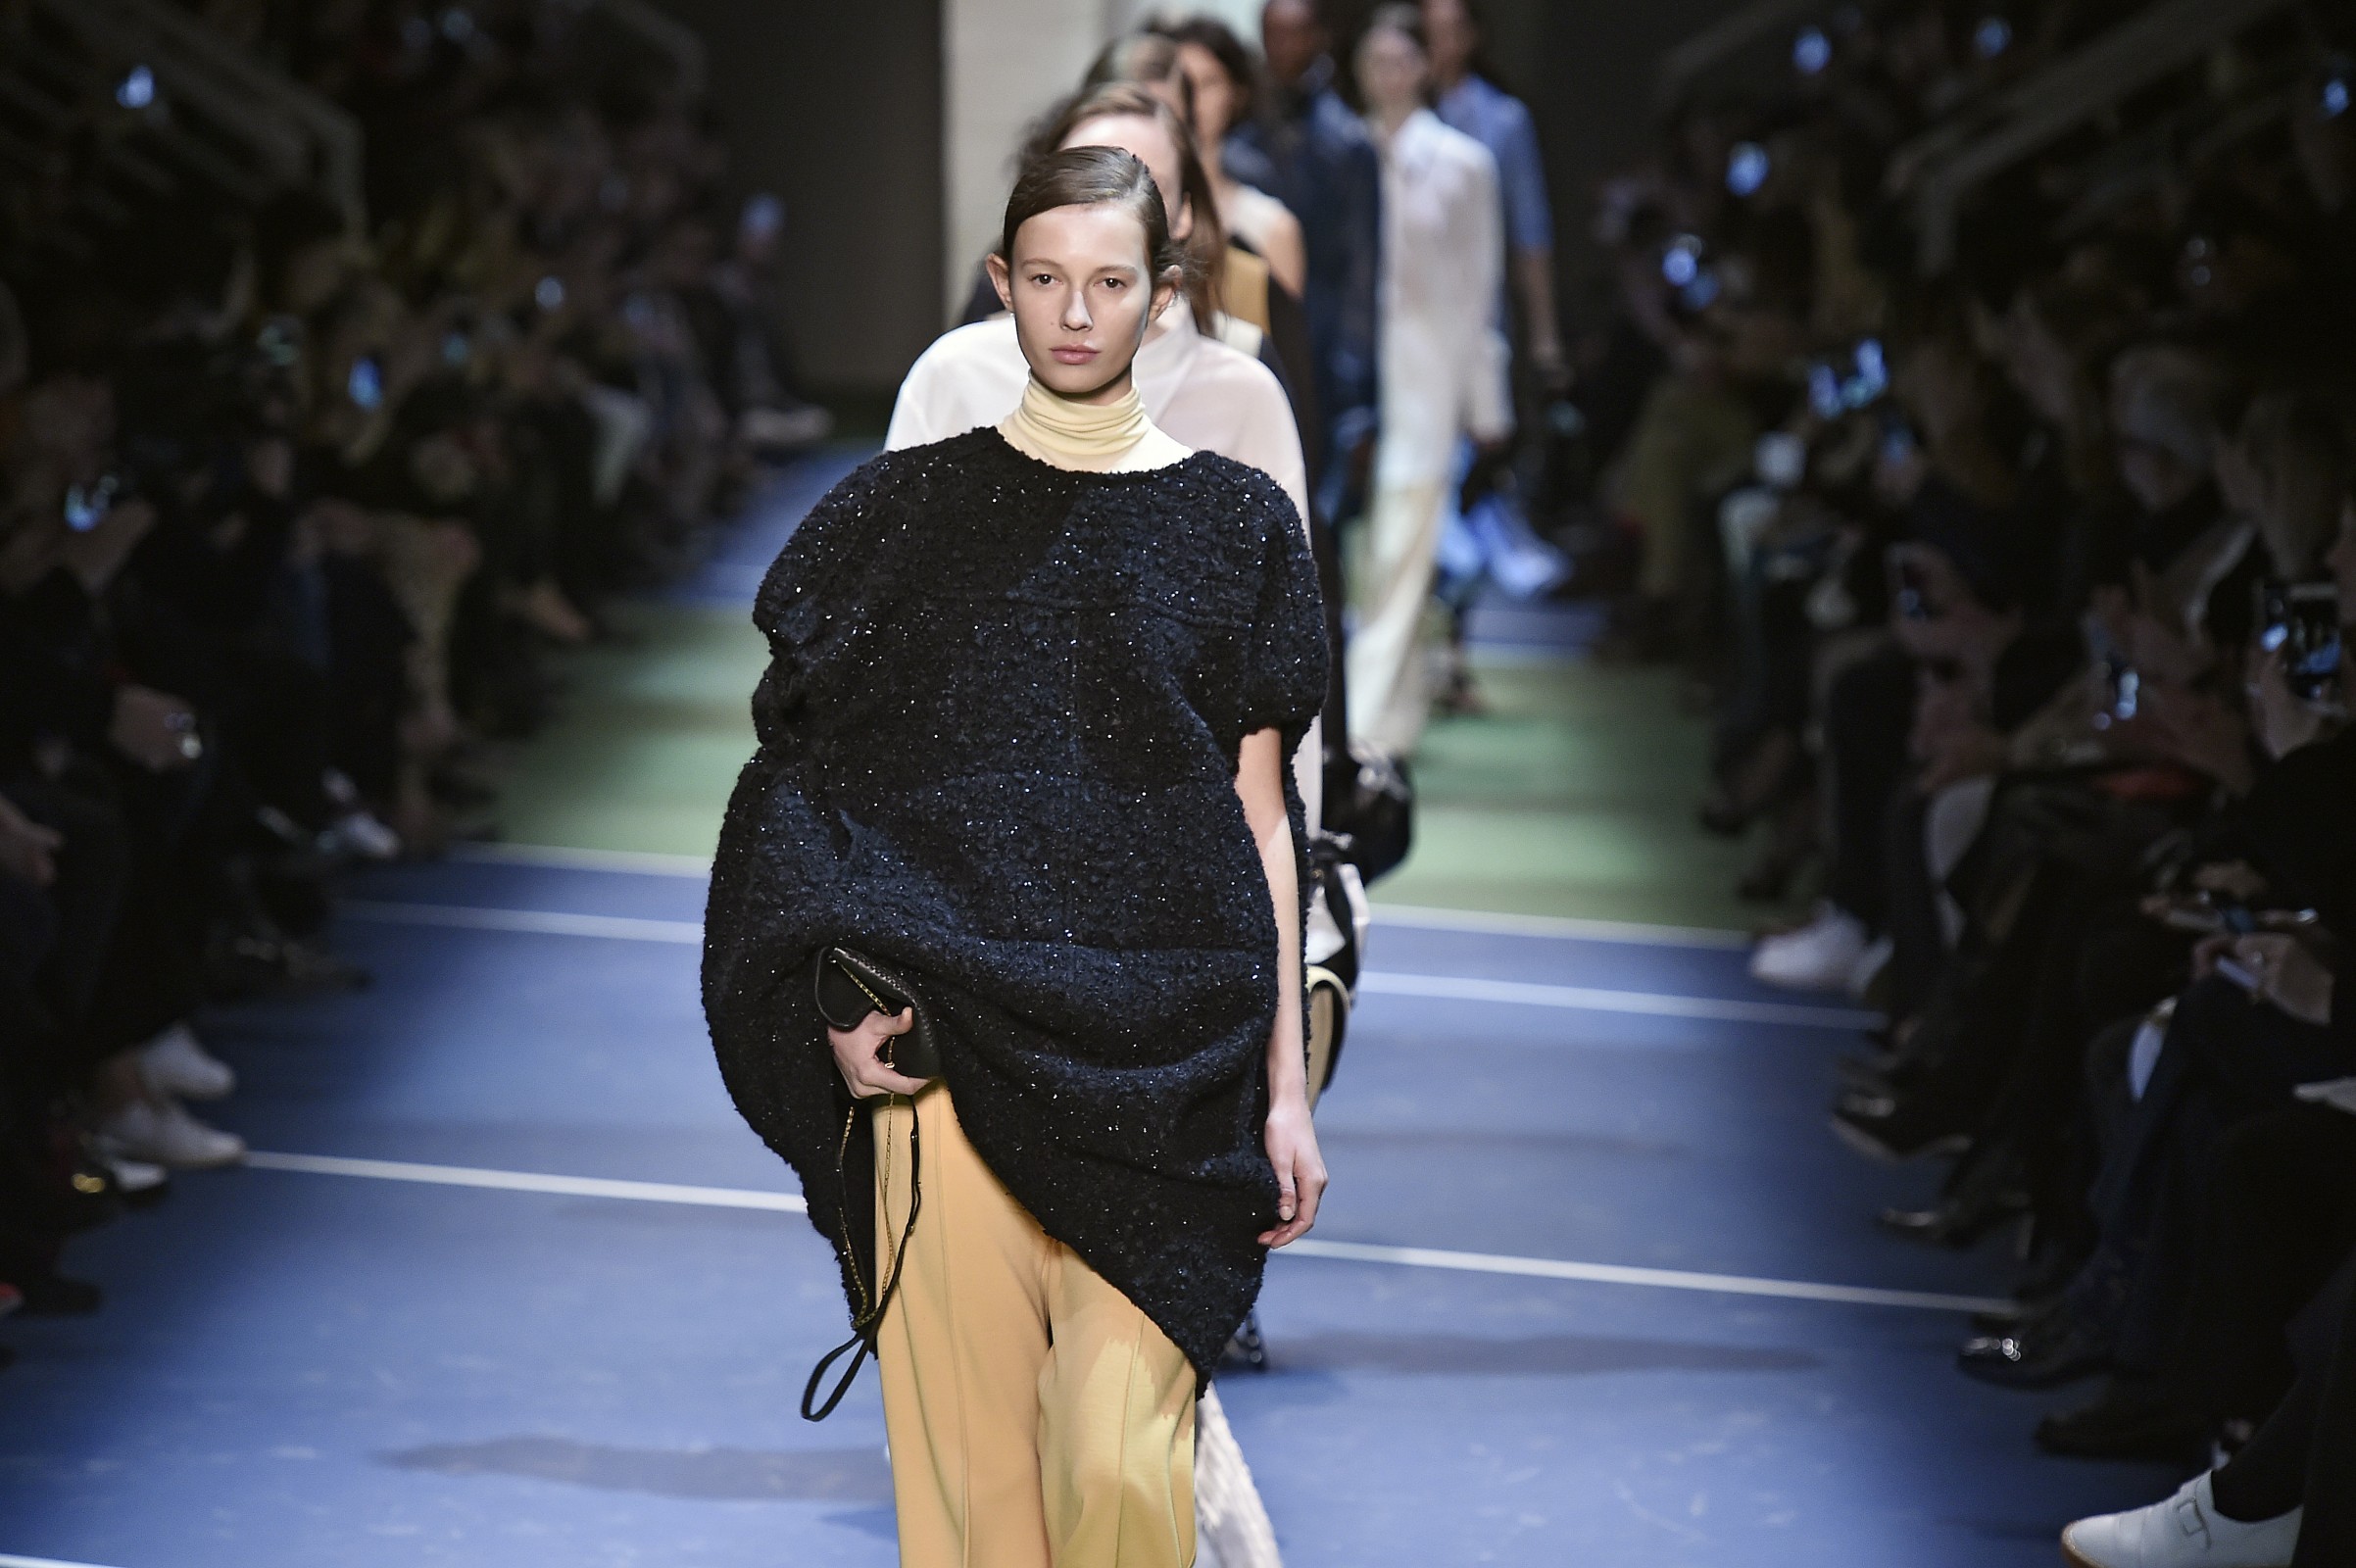 PFW: Day Six- Céline means Business - MOJEH